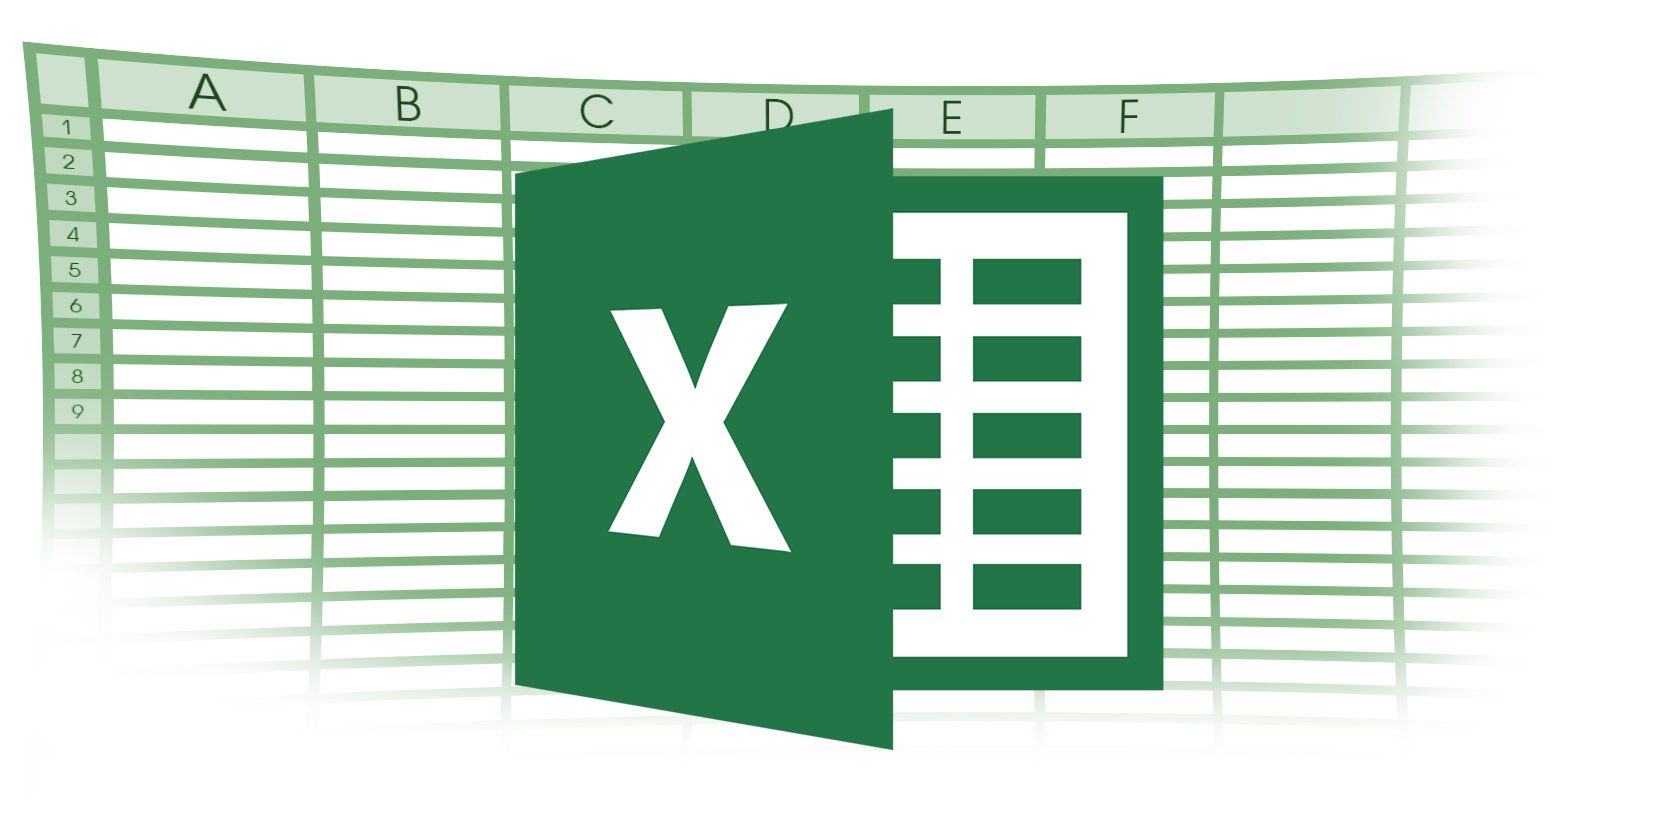 format for excel between windows and mac